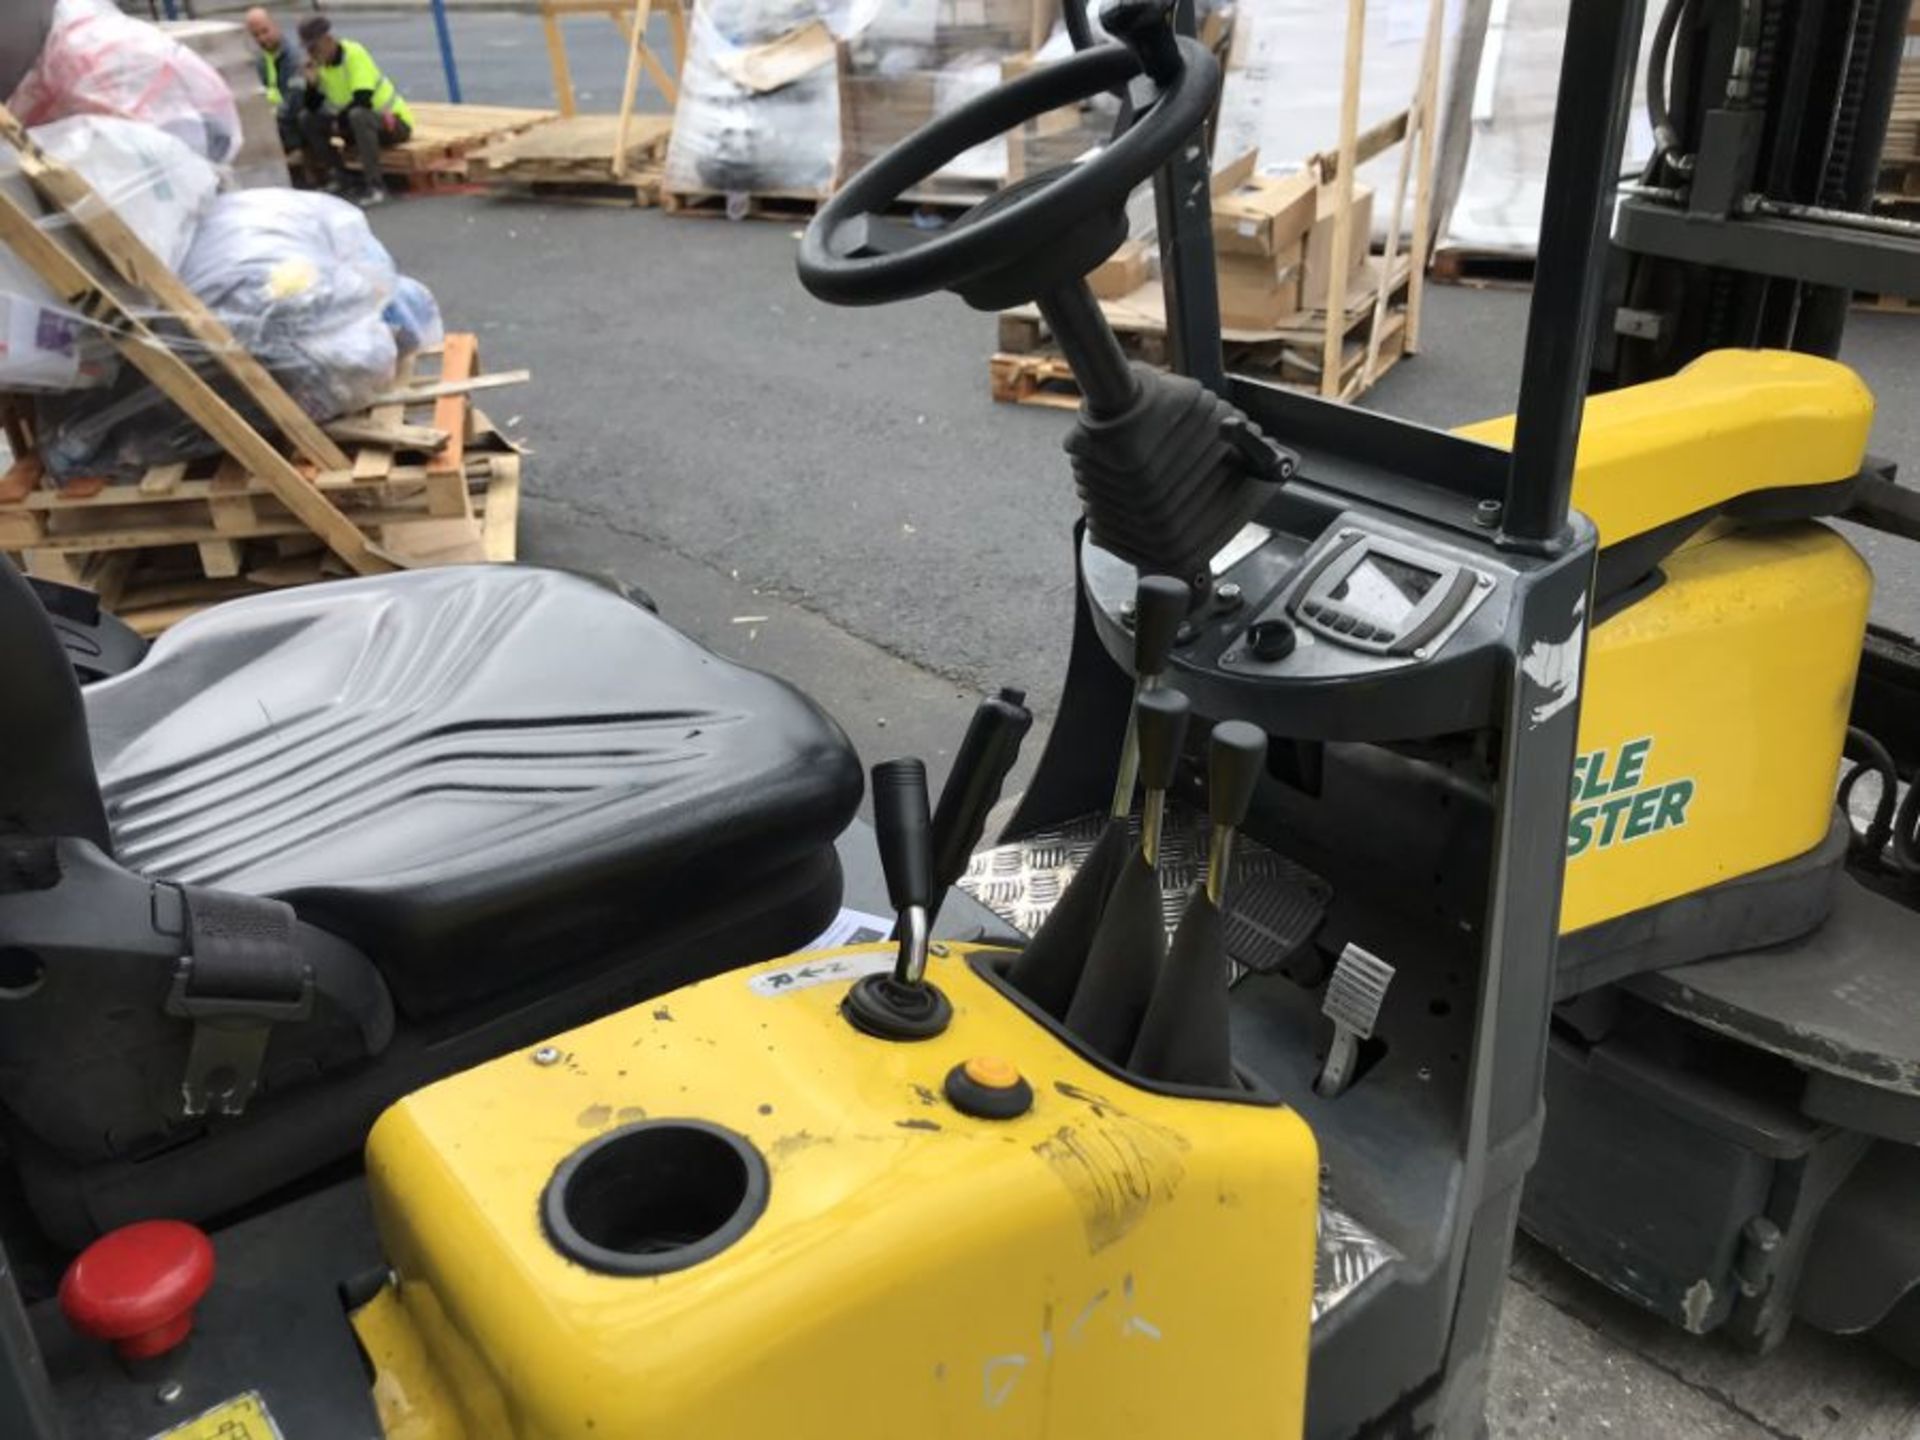 Aisle-Master 15 SE 1,500kg electric articulated fork lift truck (2018) - Image 5 of 8